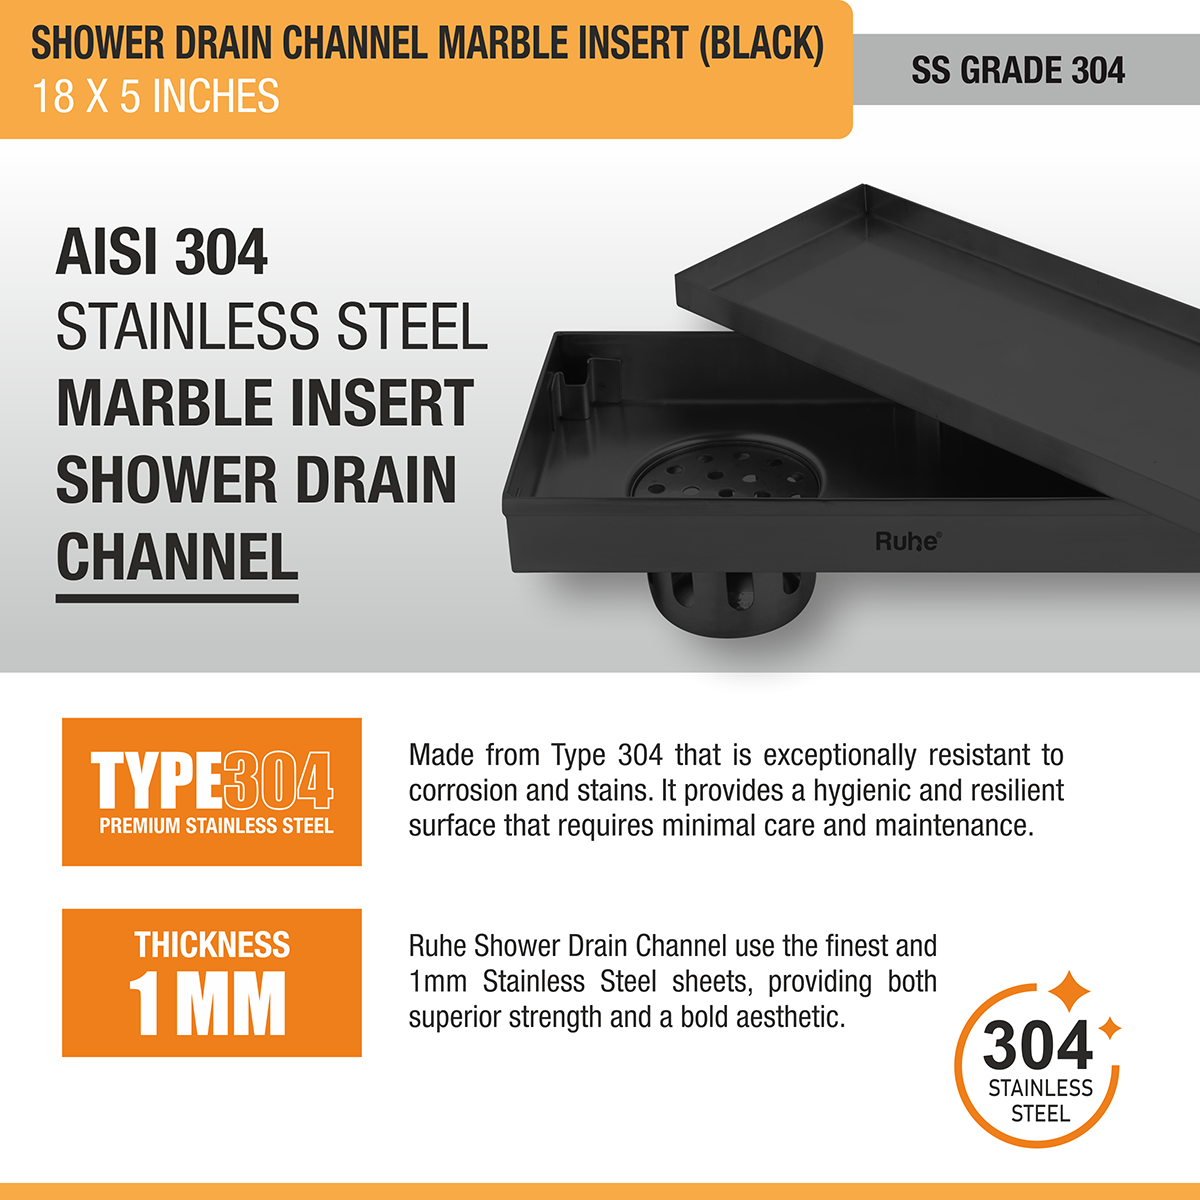 Marble Insert Shower Drain Channel (18 x 5 Inches) Black PVD Coated - by Ruhe®